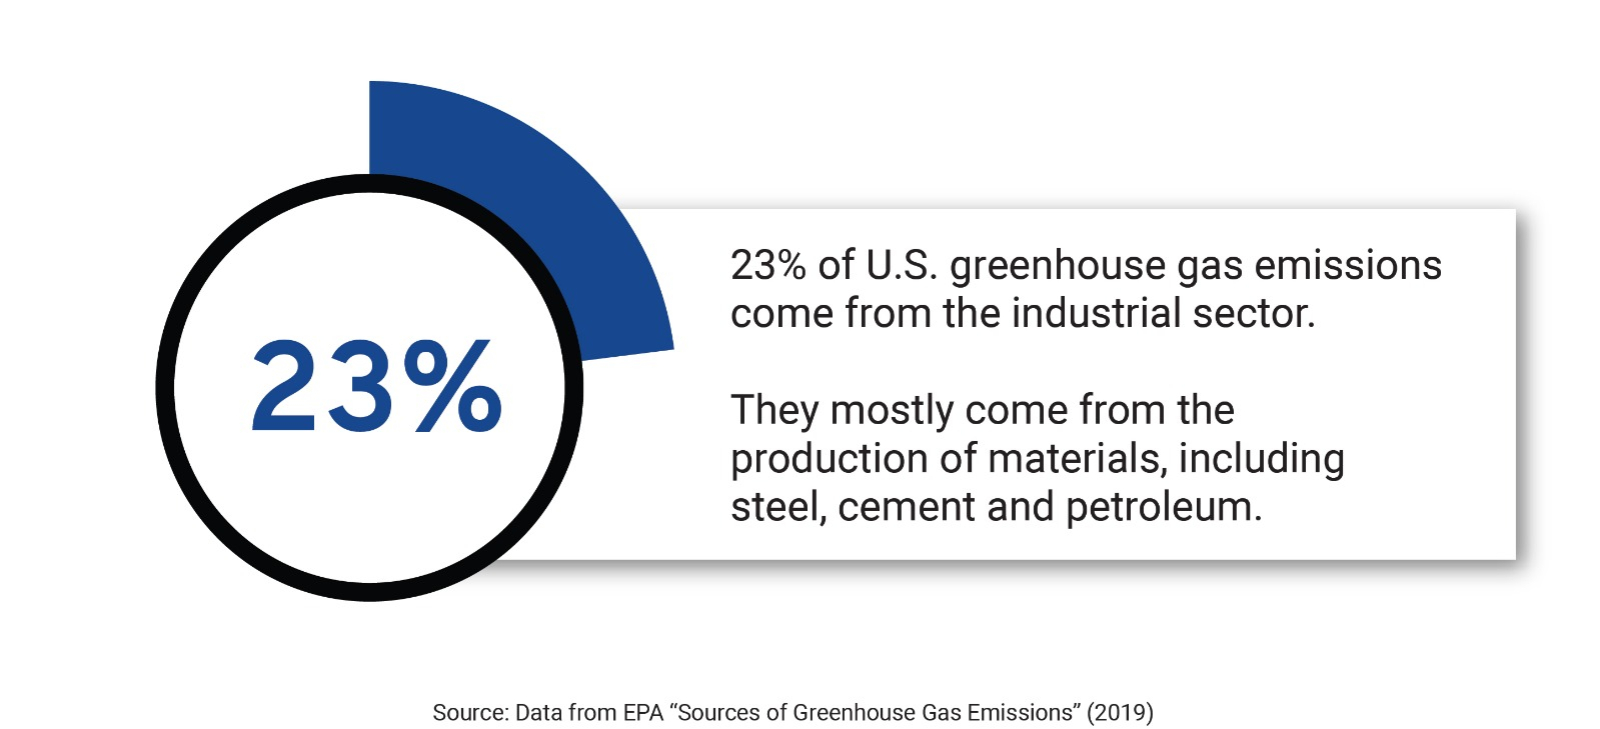 Moving to electrification in industrial sectors; 23% of greenhouse gas emissions come from the industrial sector